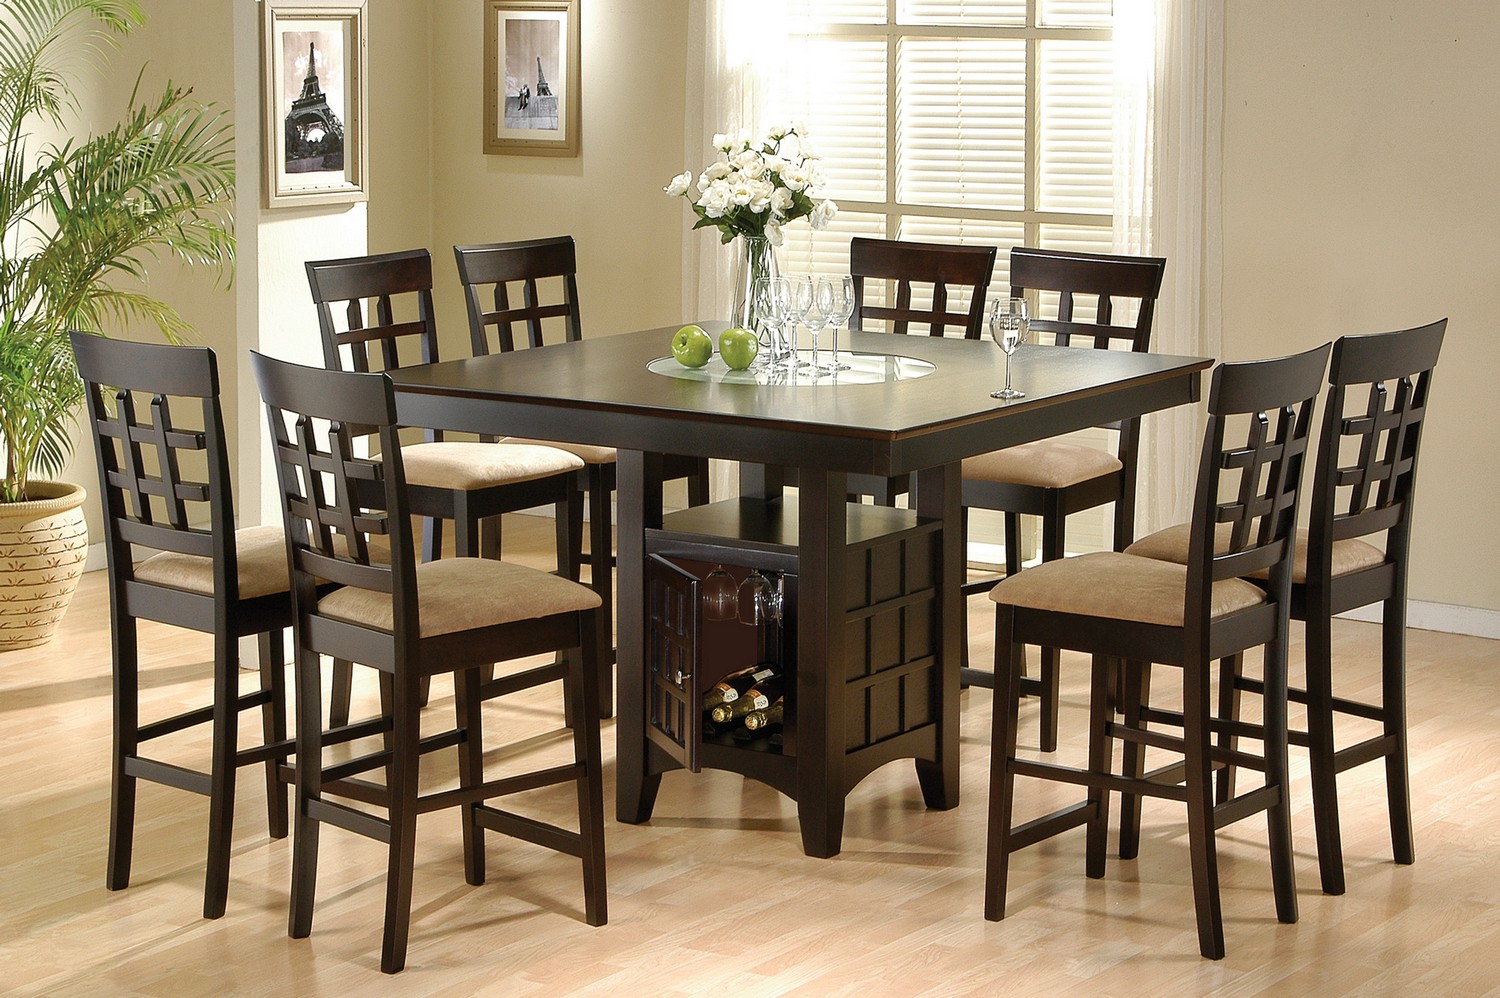 Coaster Mix and Match Counter Height Dining Table Set with Storage Pedestal Base - Cappuccino